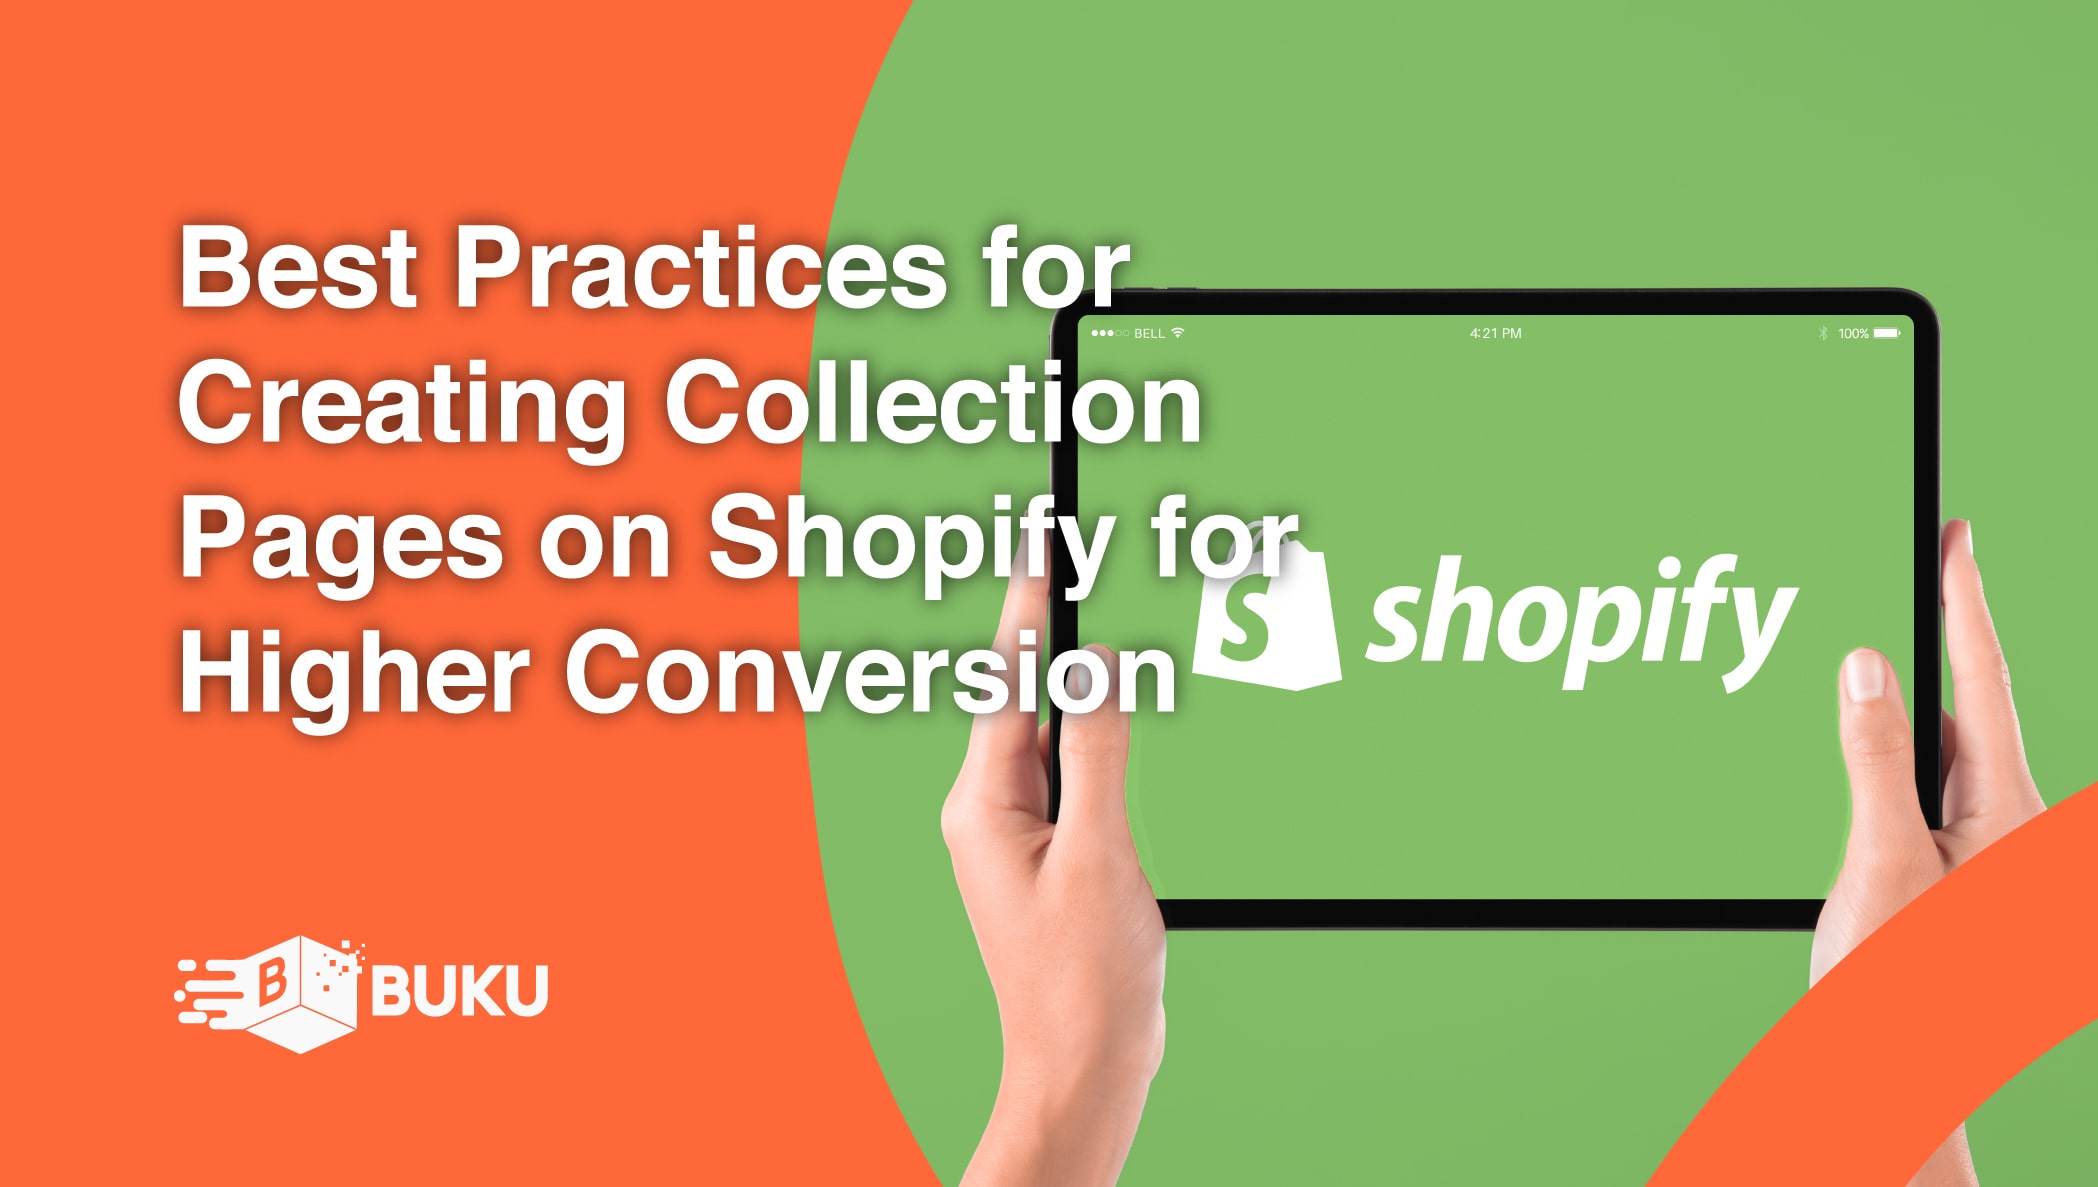 Best Practices for Creating Collection Pages on Shopify for Higher Conversion